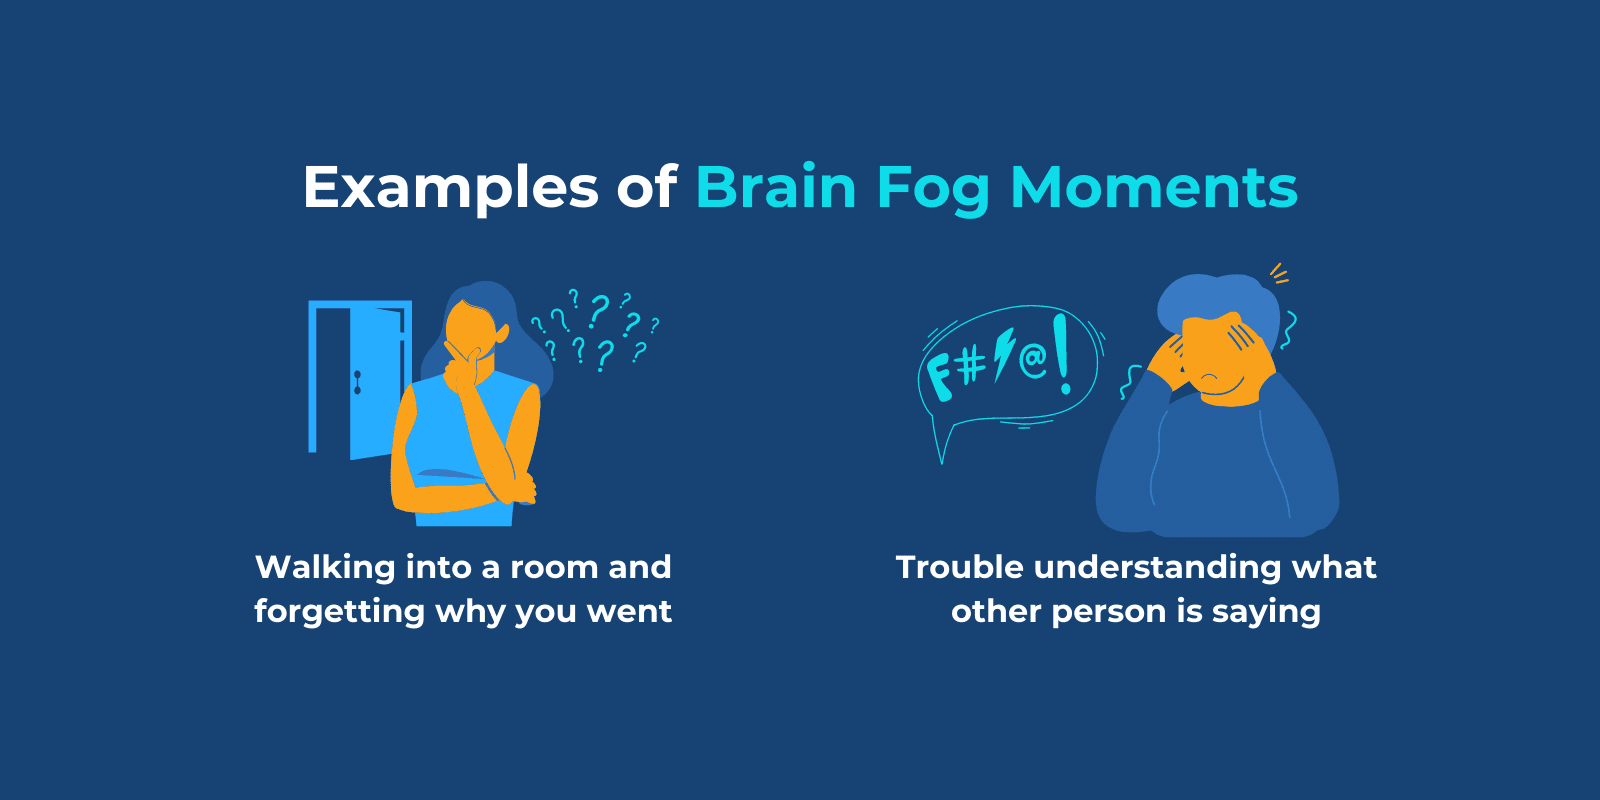 2 Examples of Brain Fog moments represented with digital illustrations